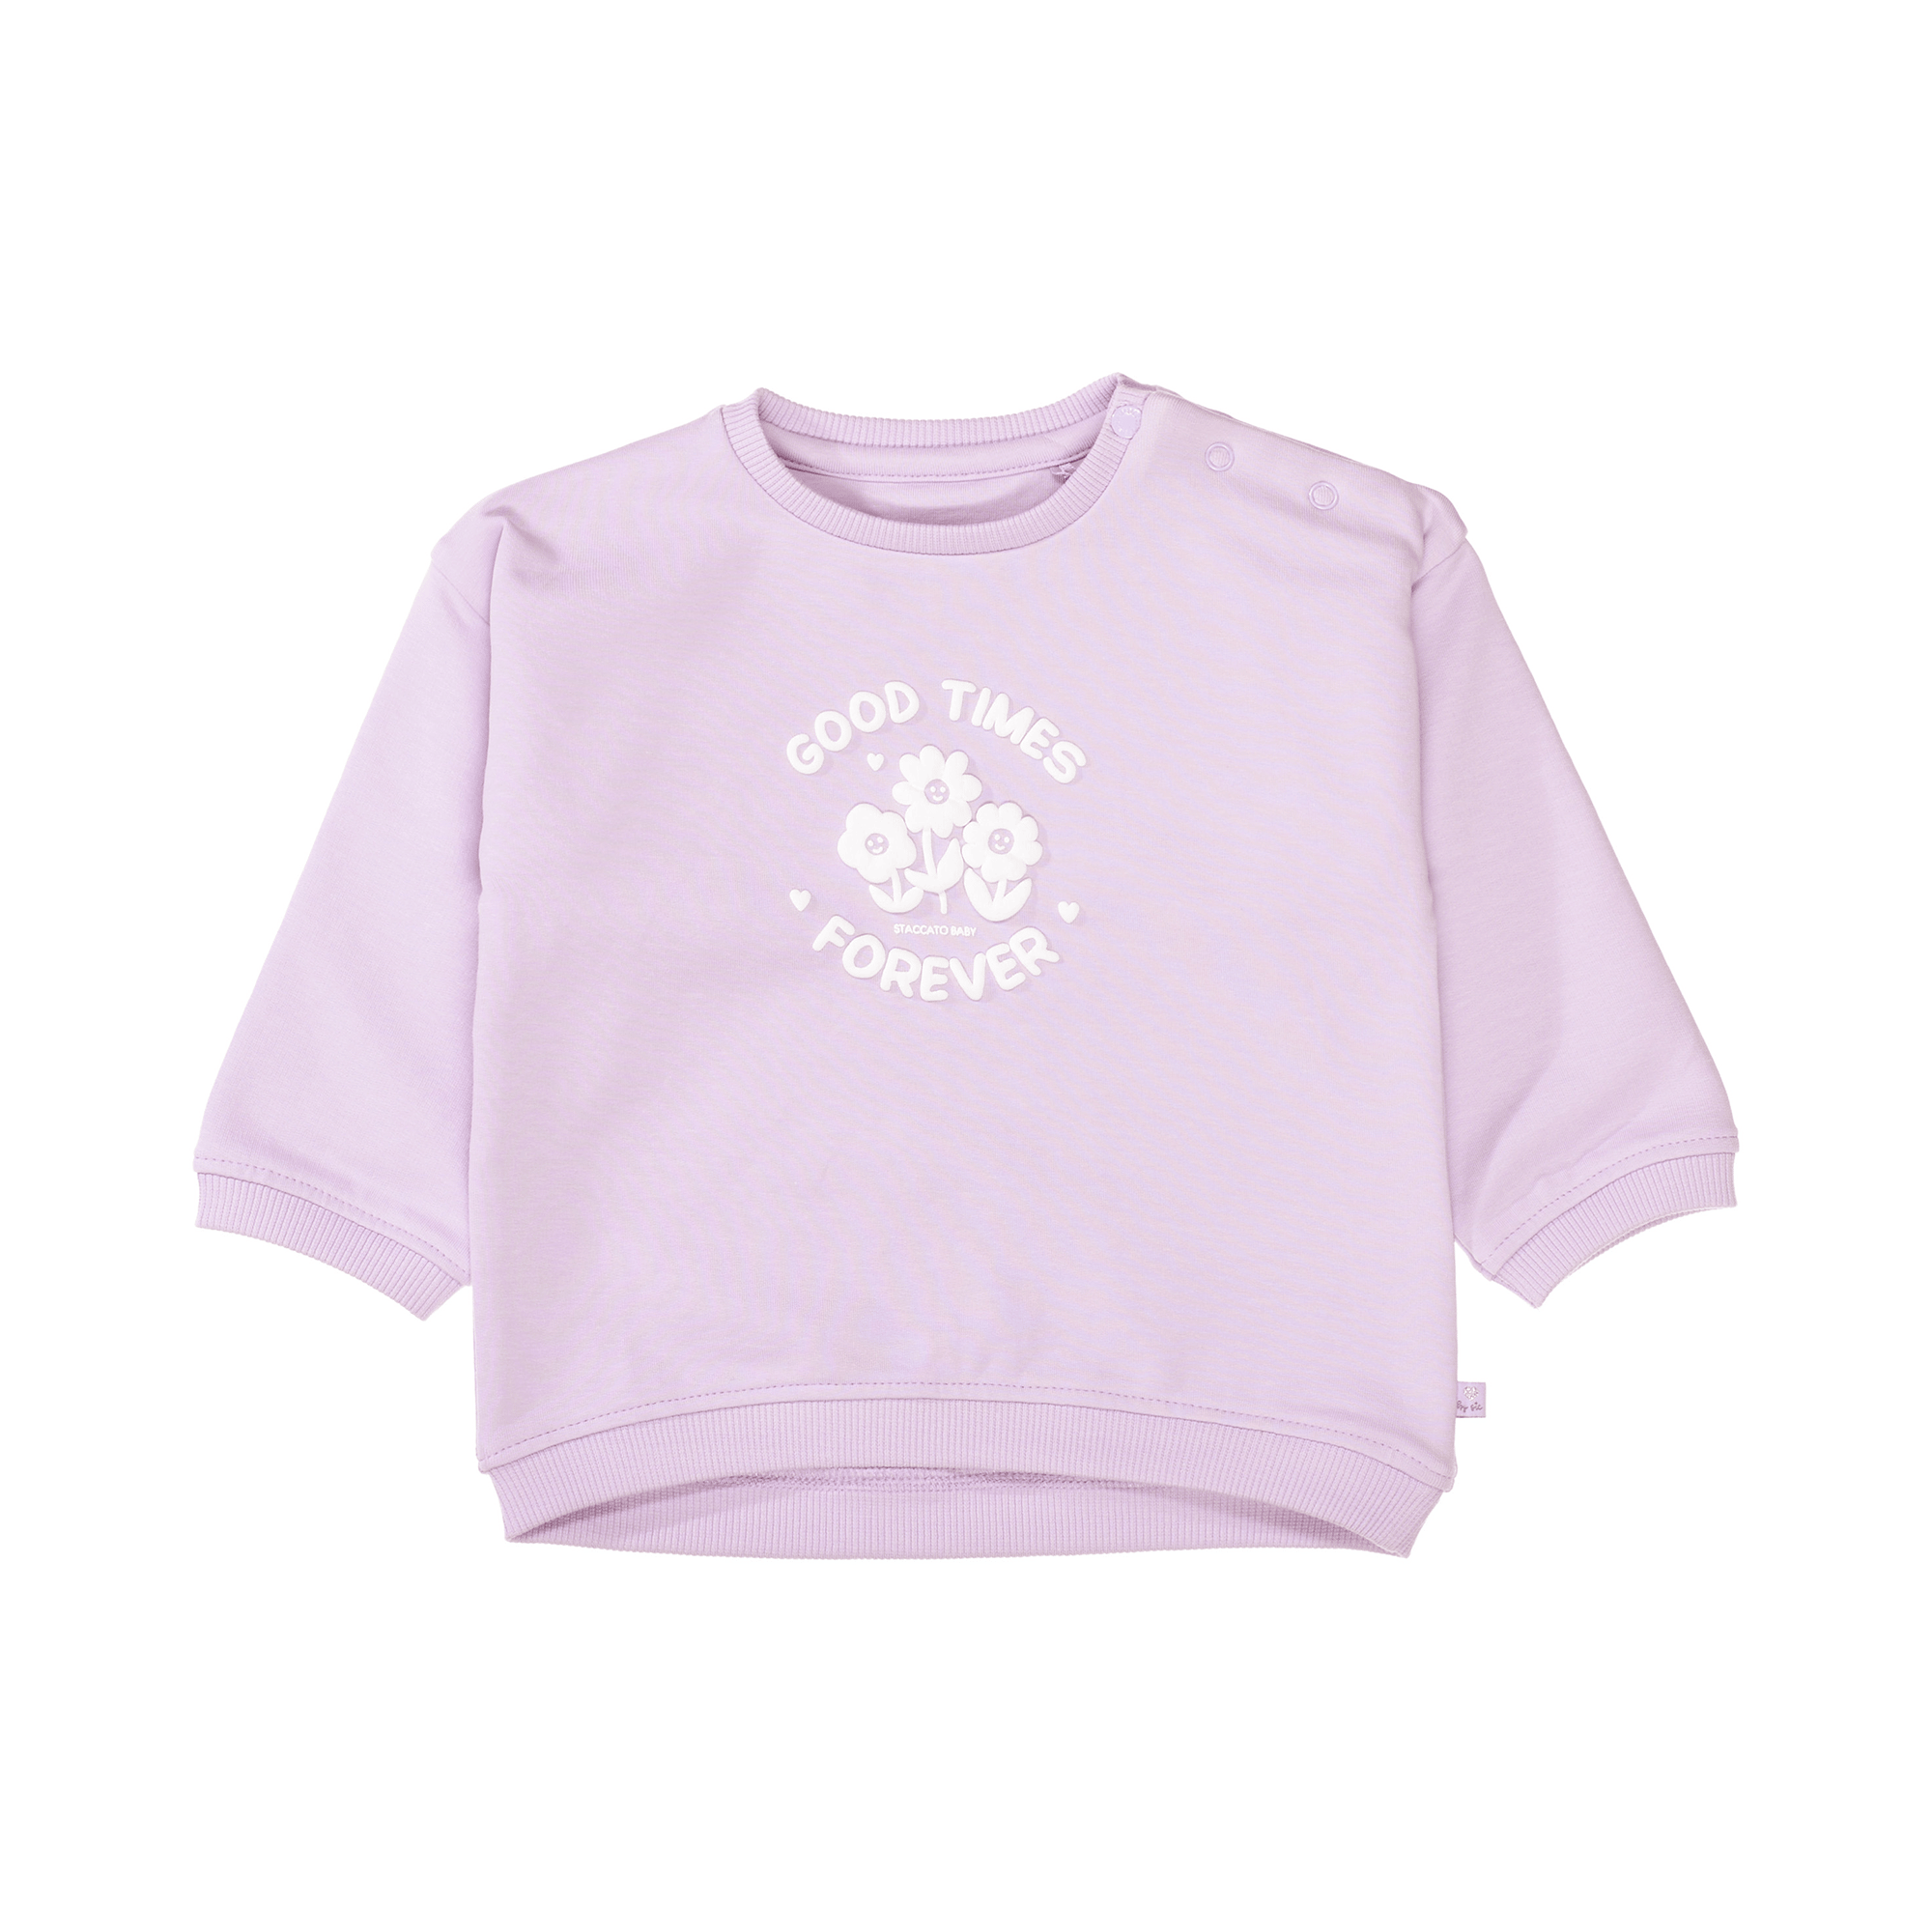 Sweatshirt Good Times Forever STACCATO Lila M2000585458300 1